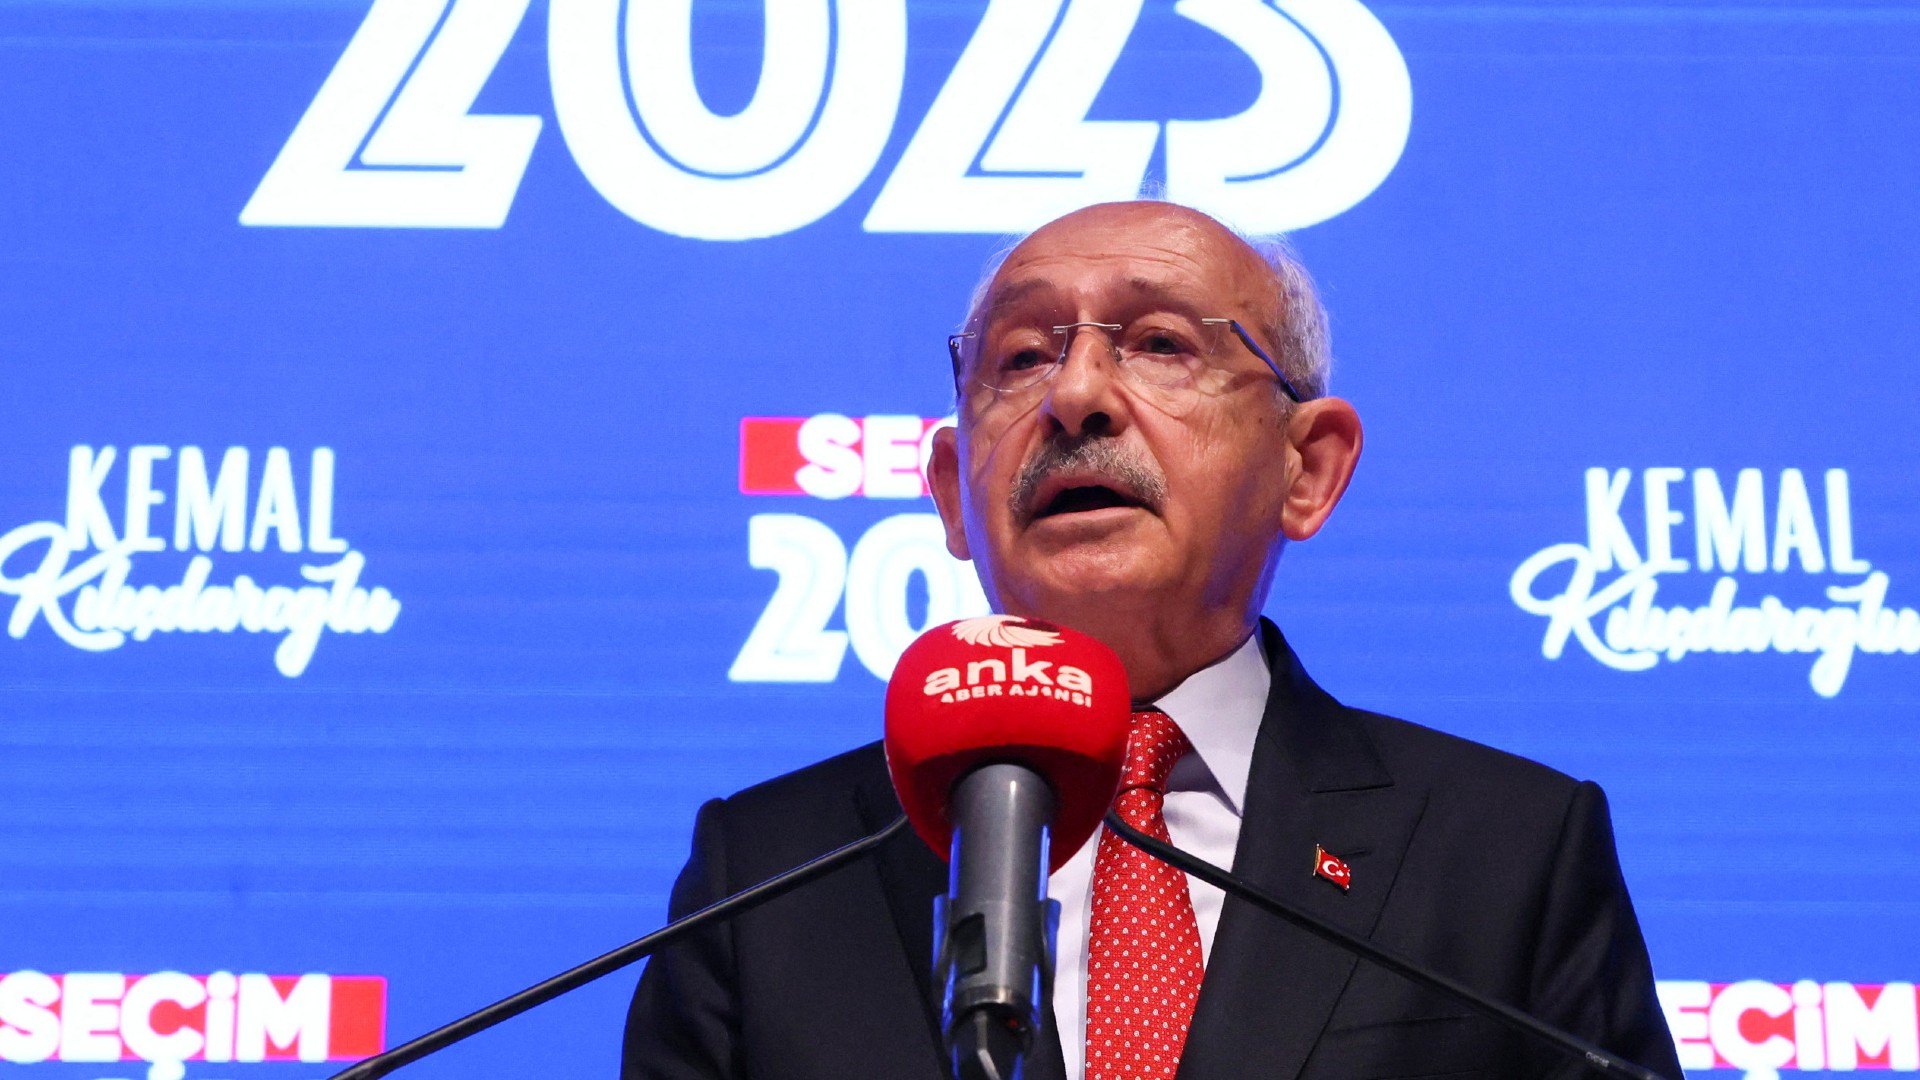 Kemal Kilicdaroglu speaks following early results for the second round of the presidential election in Ankara (Reuters)